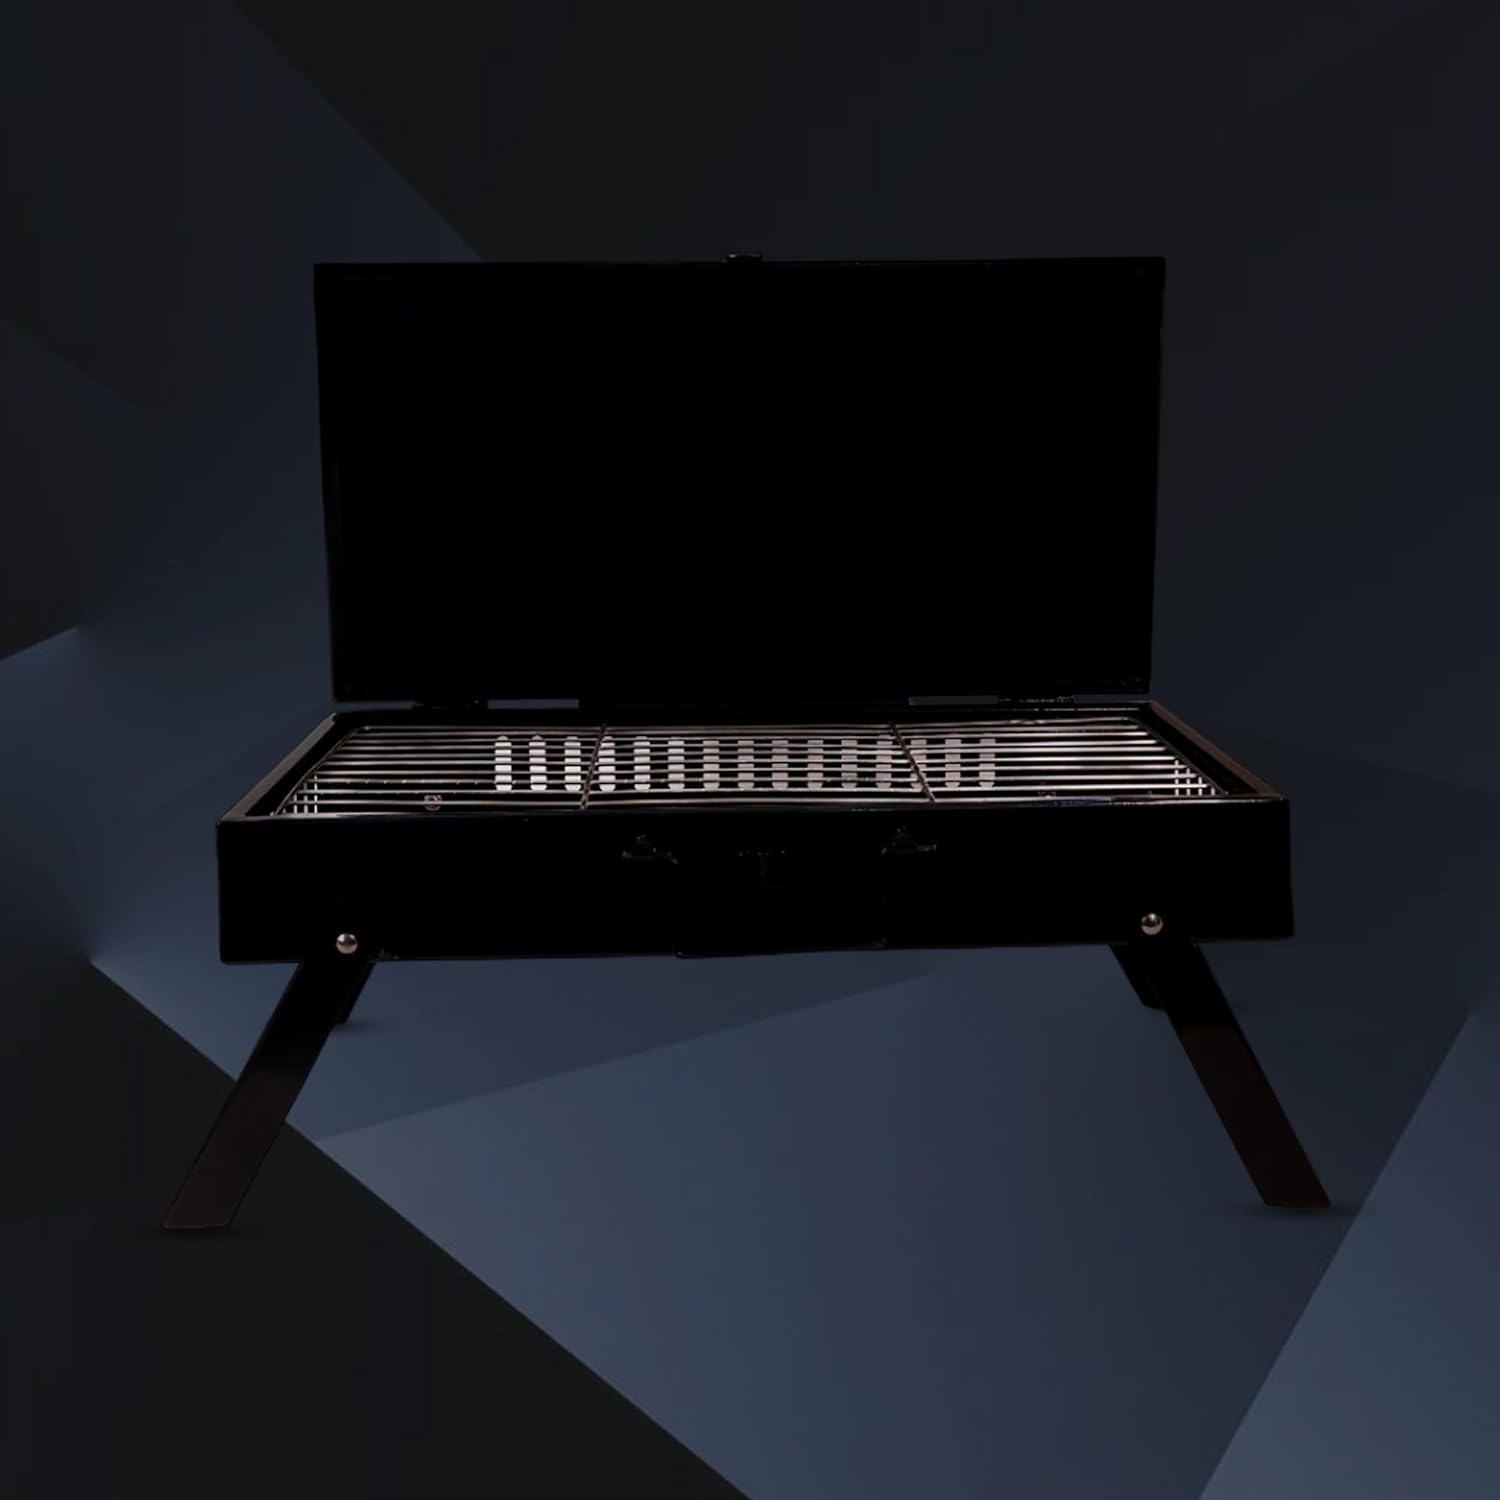 GrillPorter Briefcase Barbeque with Lid grill set | Charcoal Griller BBQ With 6 Skewers & 1 Tong